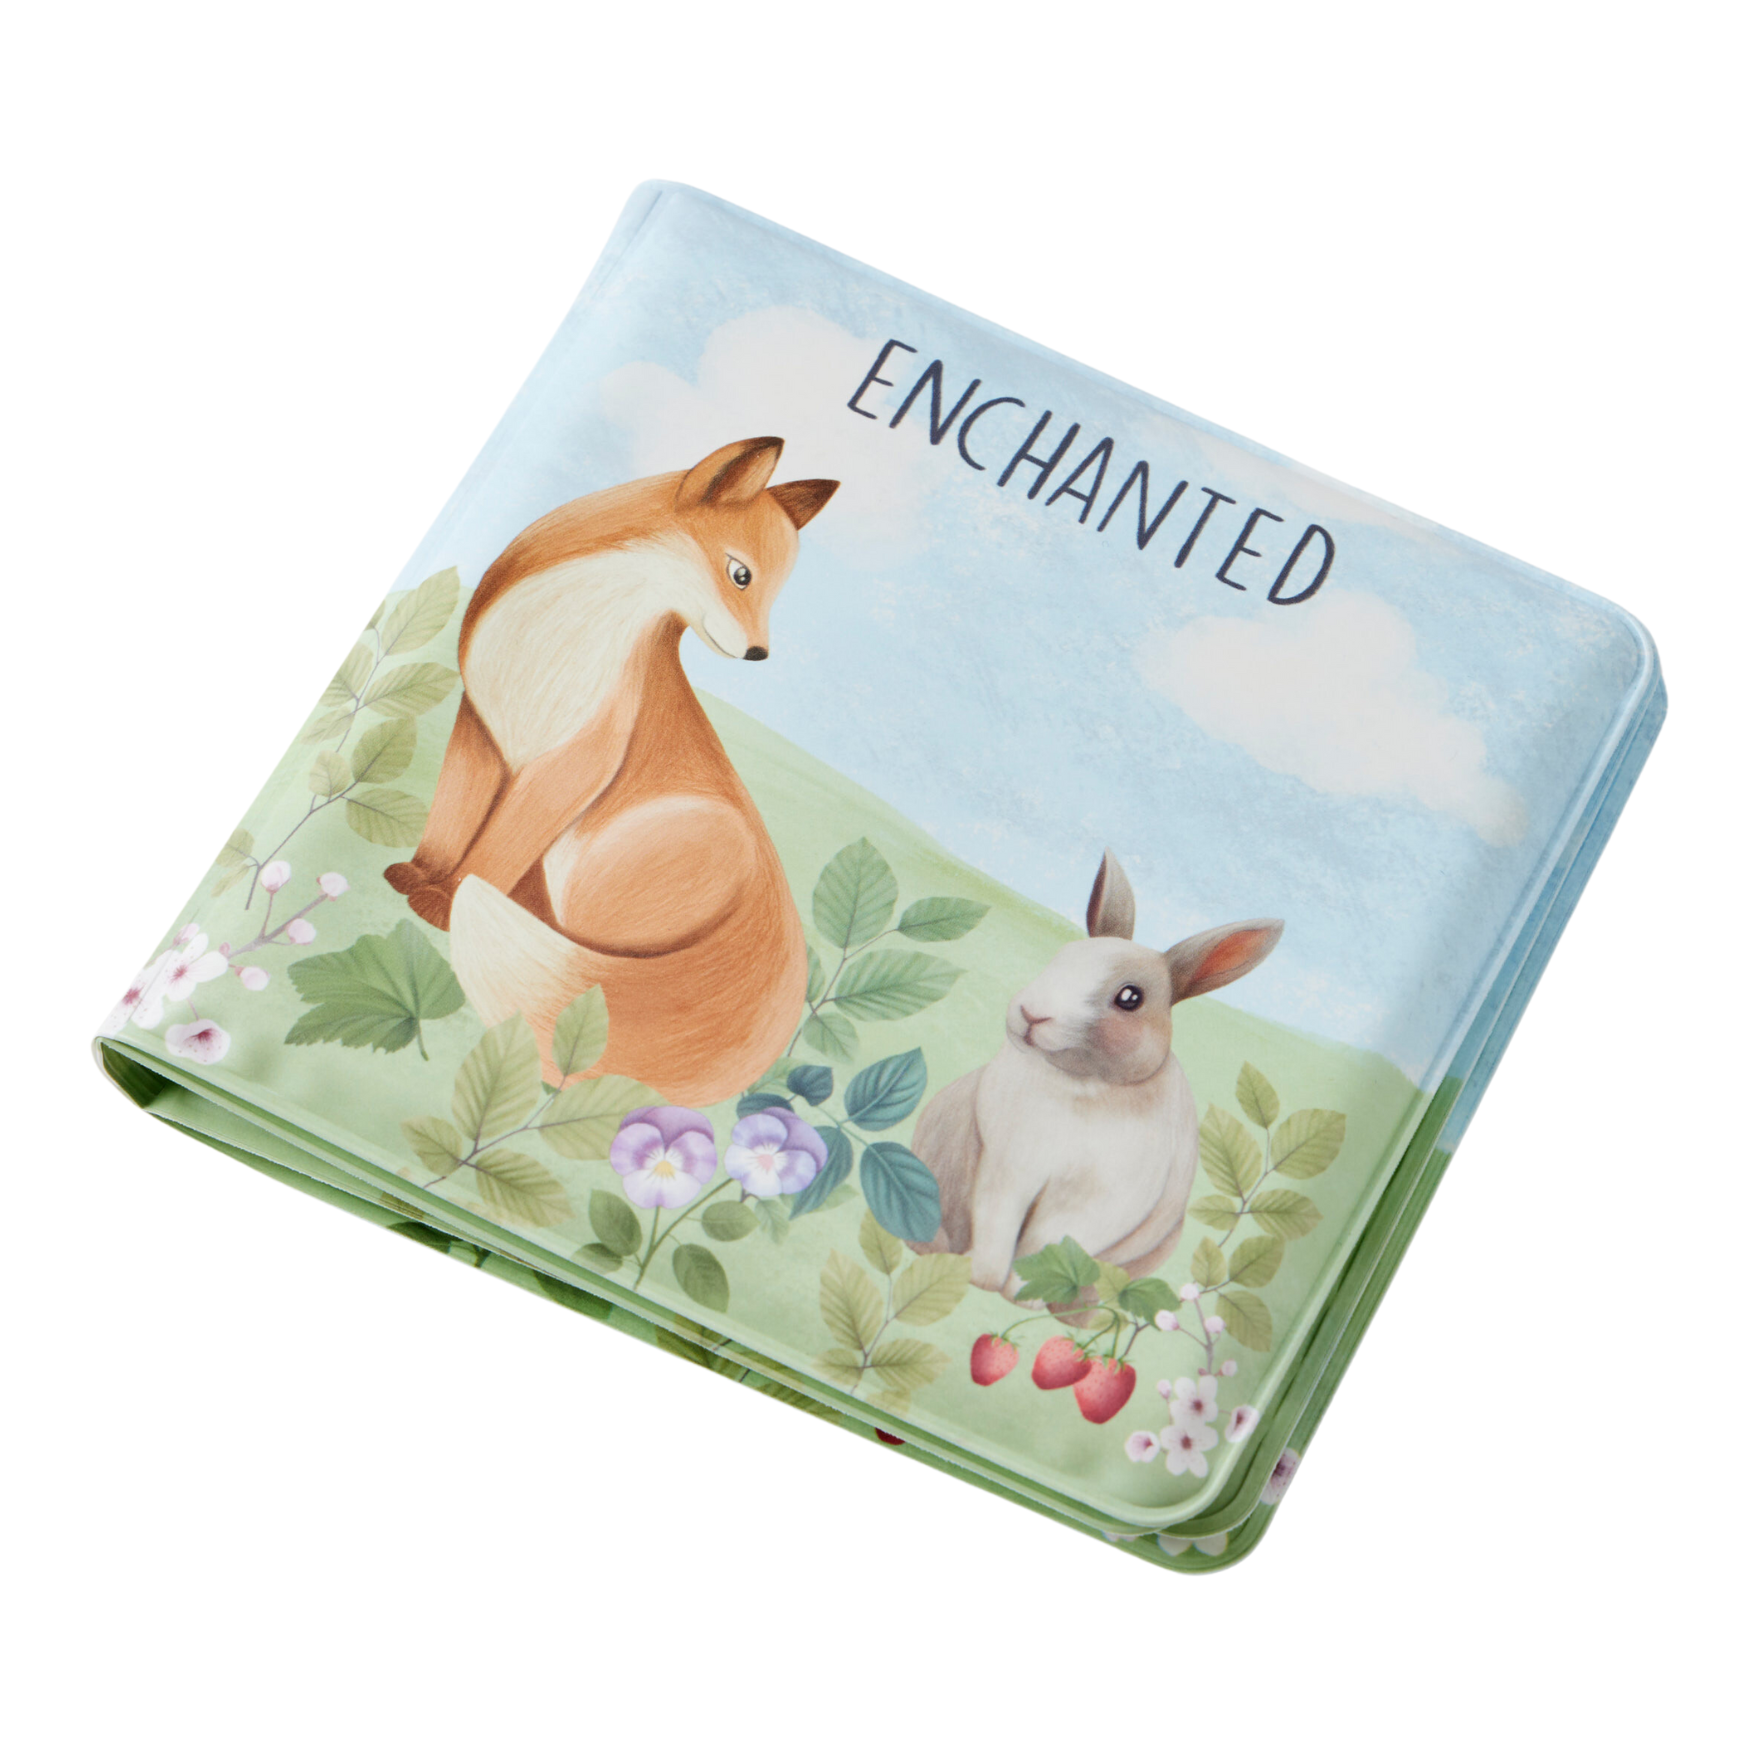 Fox and rabbit illustration on cover of square padded bath book